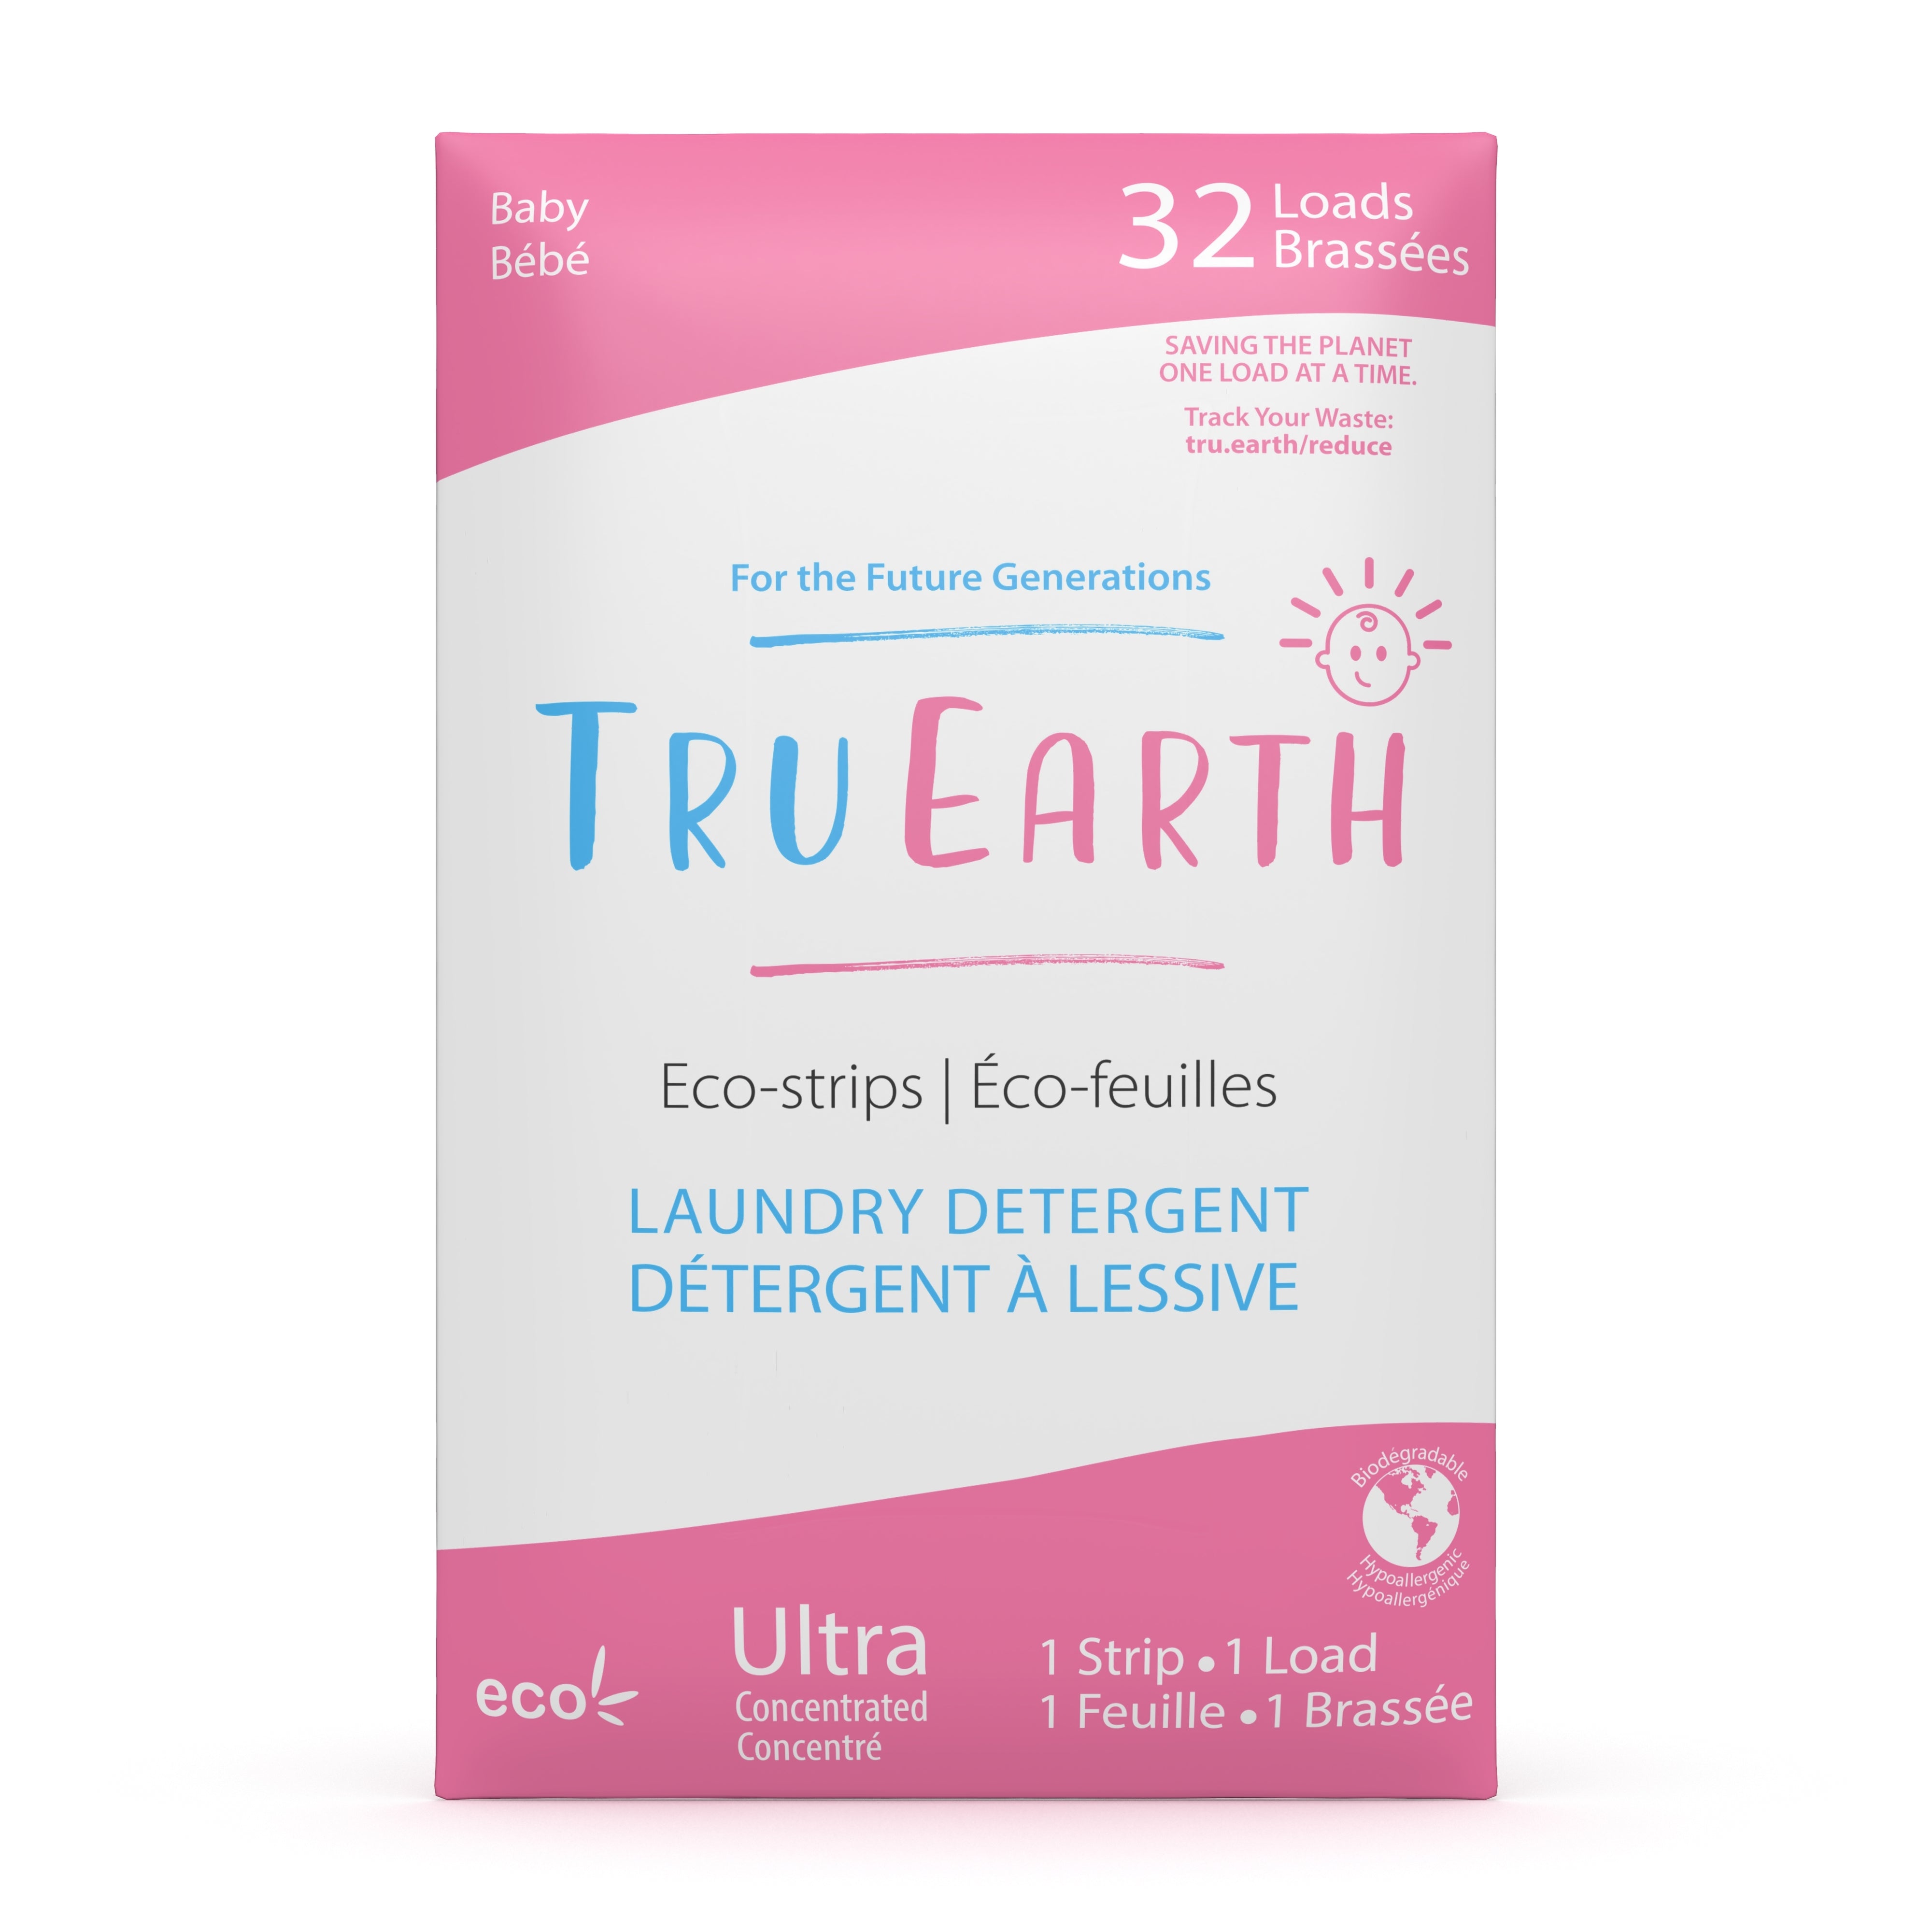 Tru Earth Eco-strips Laundry Detergent for Sustainable Zero-Waste Laundry; Baby Laundry Soap 32 Loads 